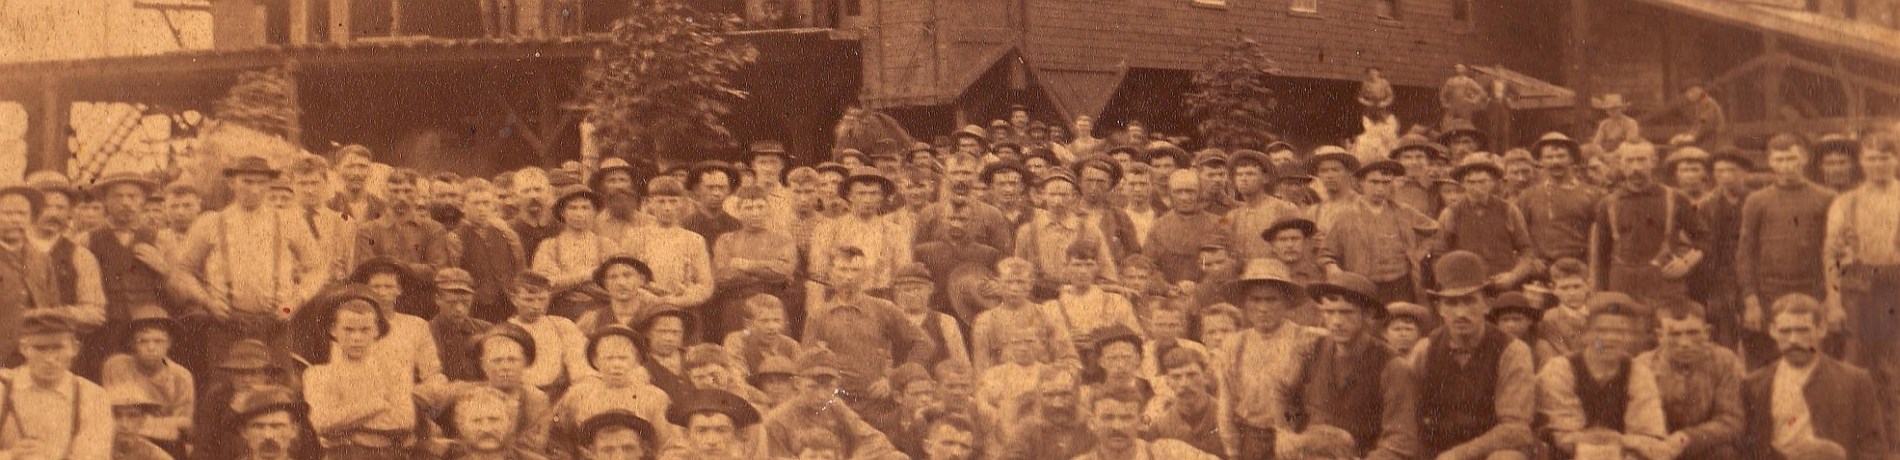 Group of people in front of a sawmill